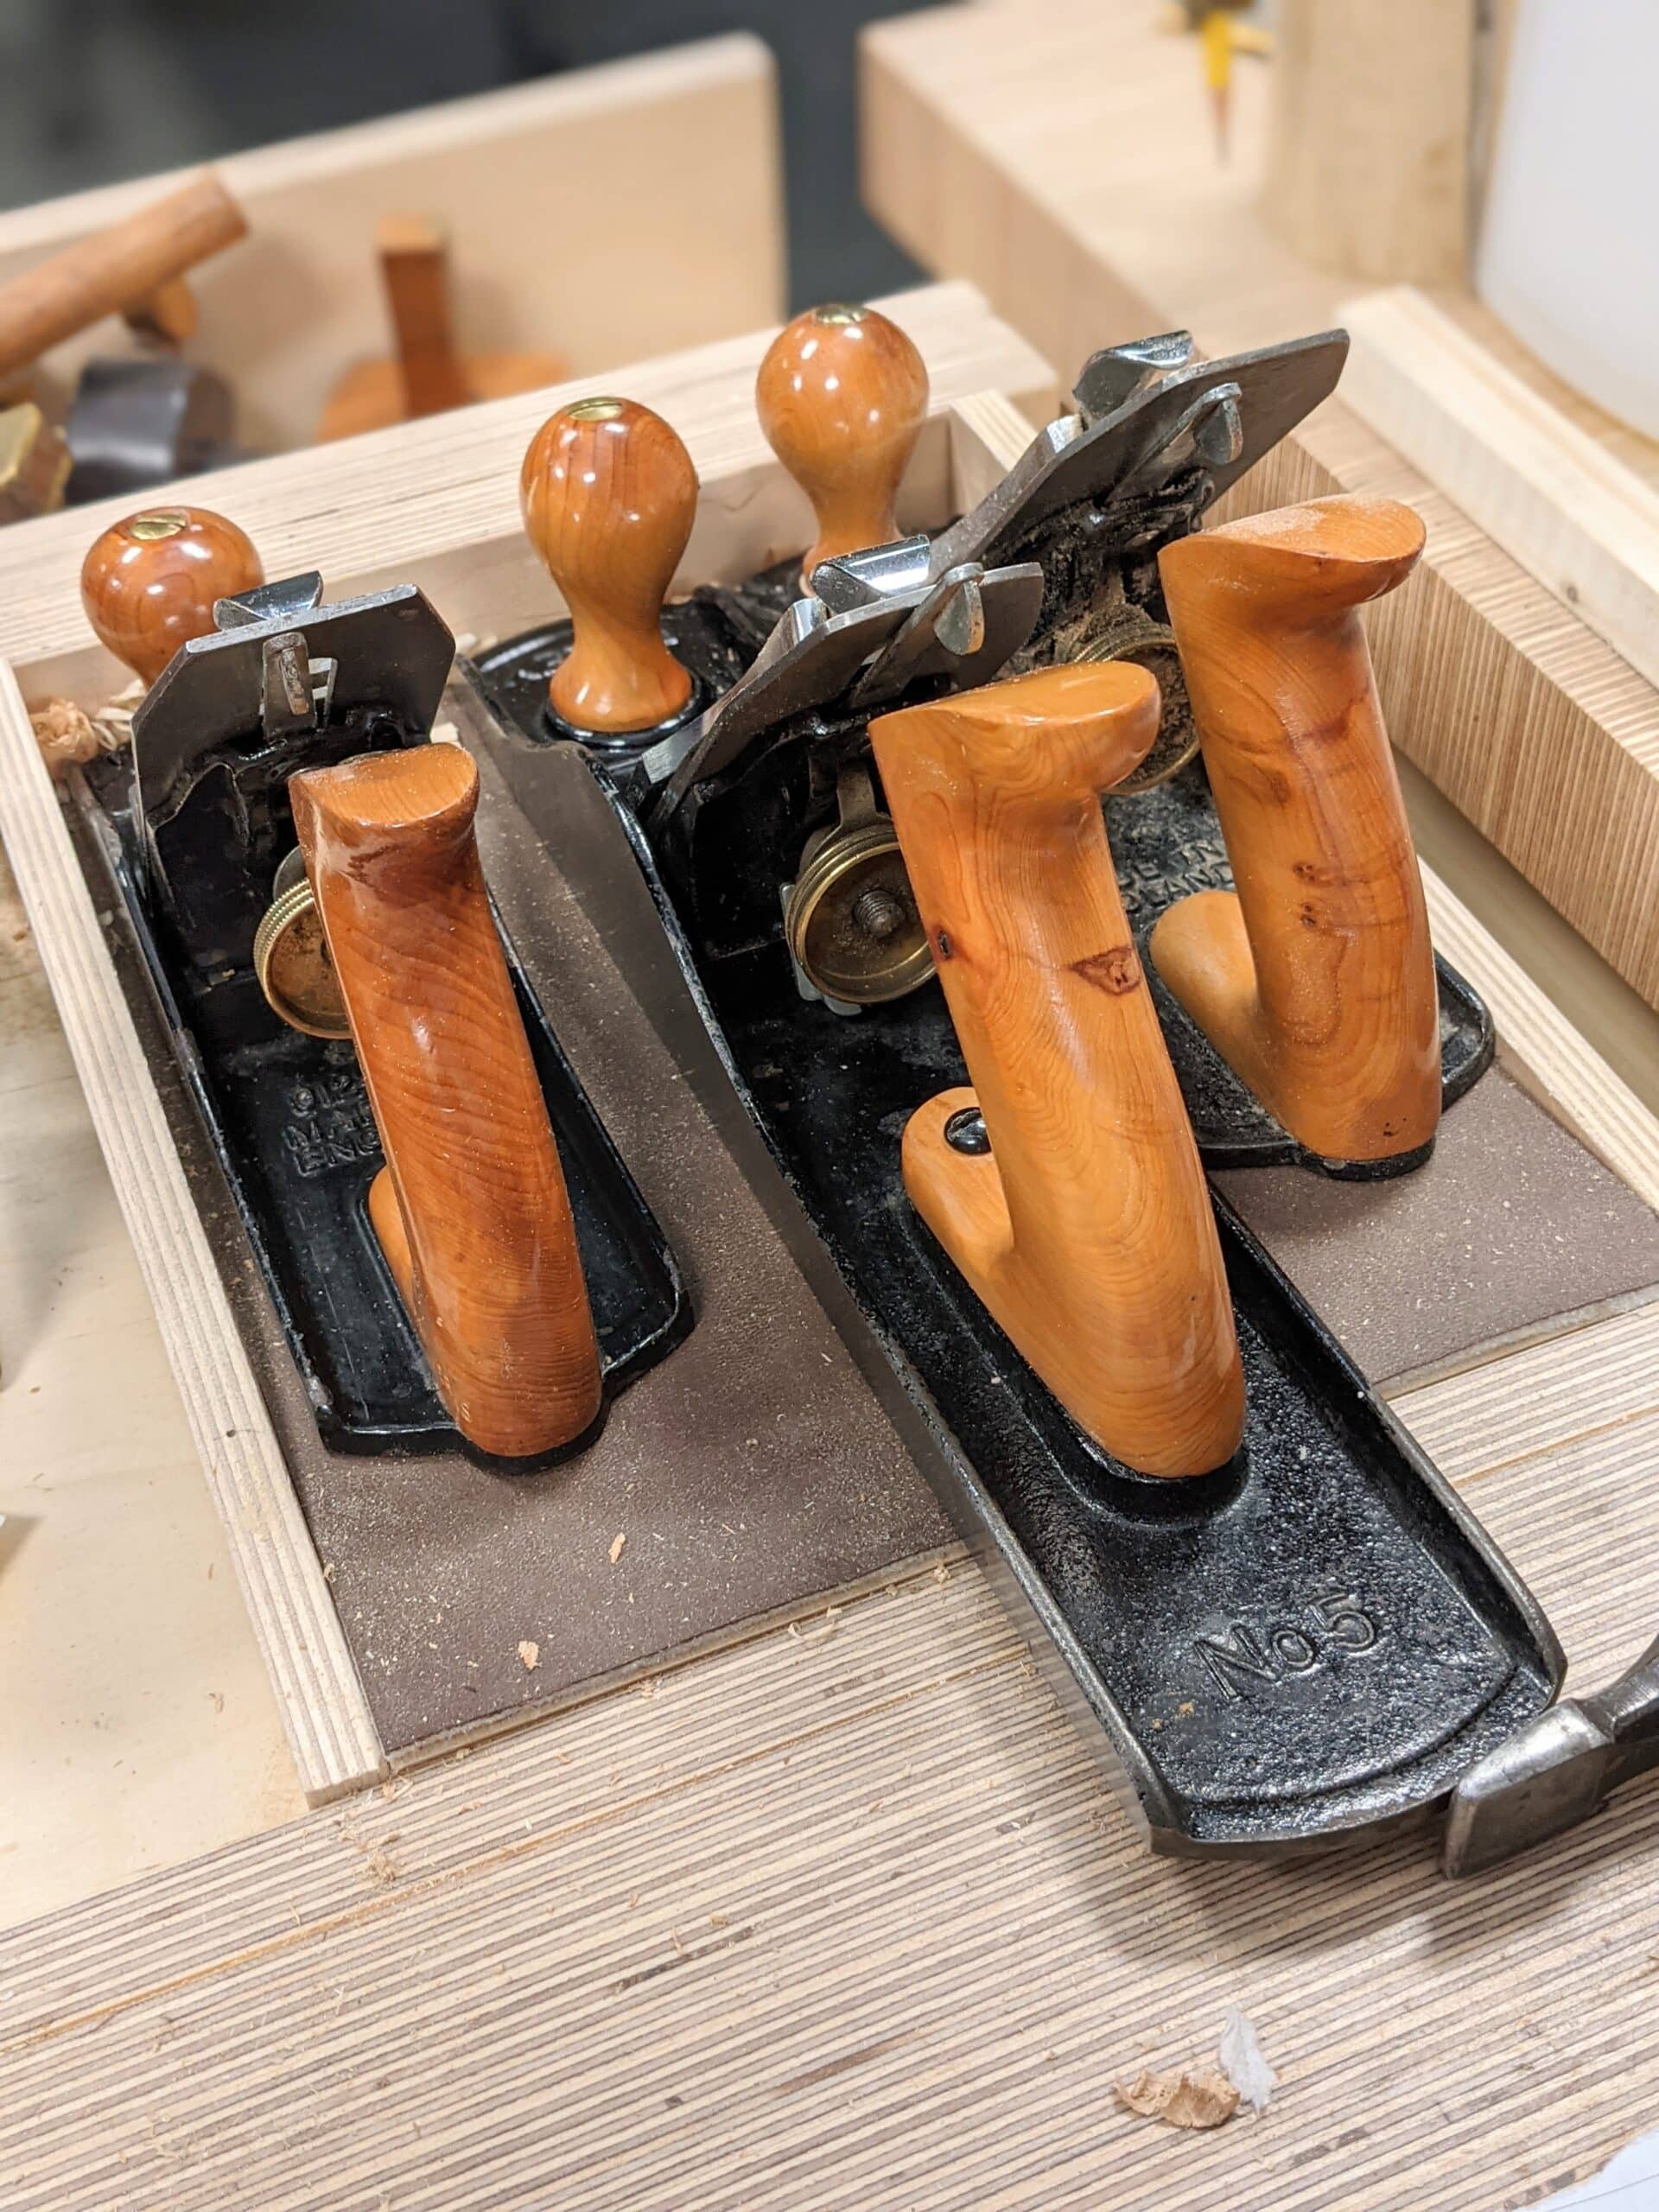 Buying good tools cheap - smoothing planes - Paul Sellers' Blog